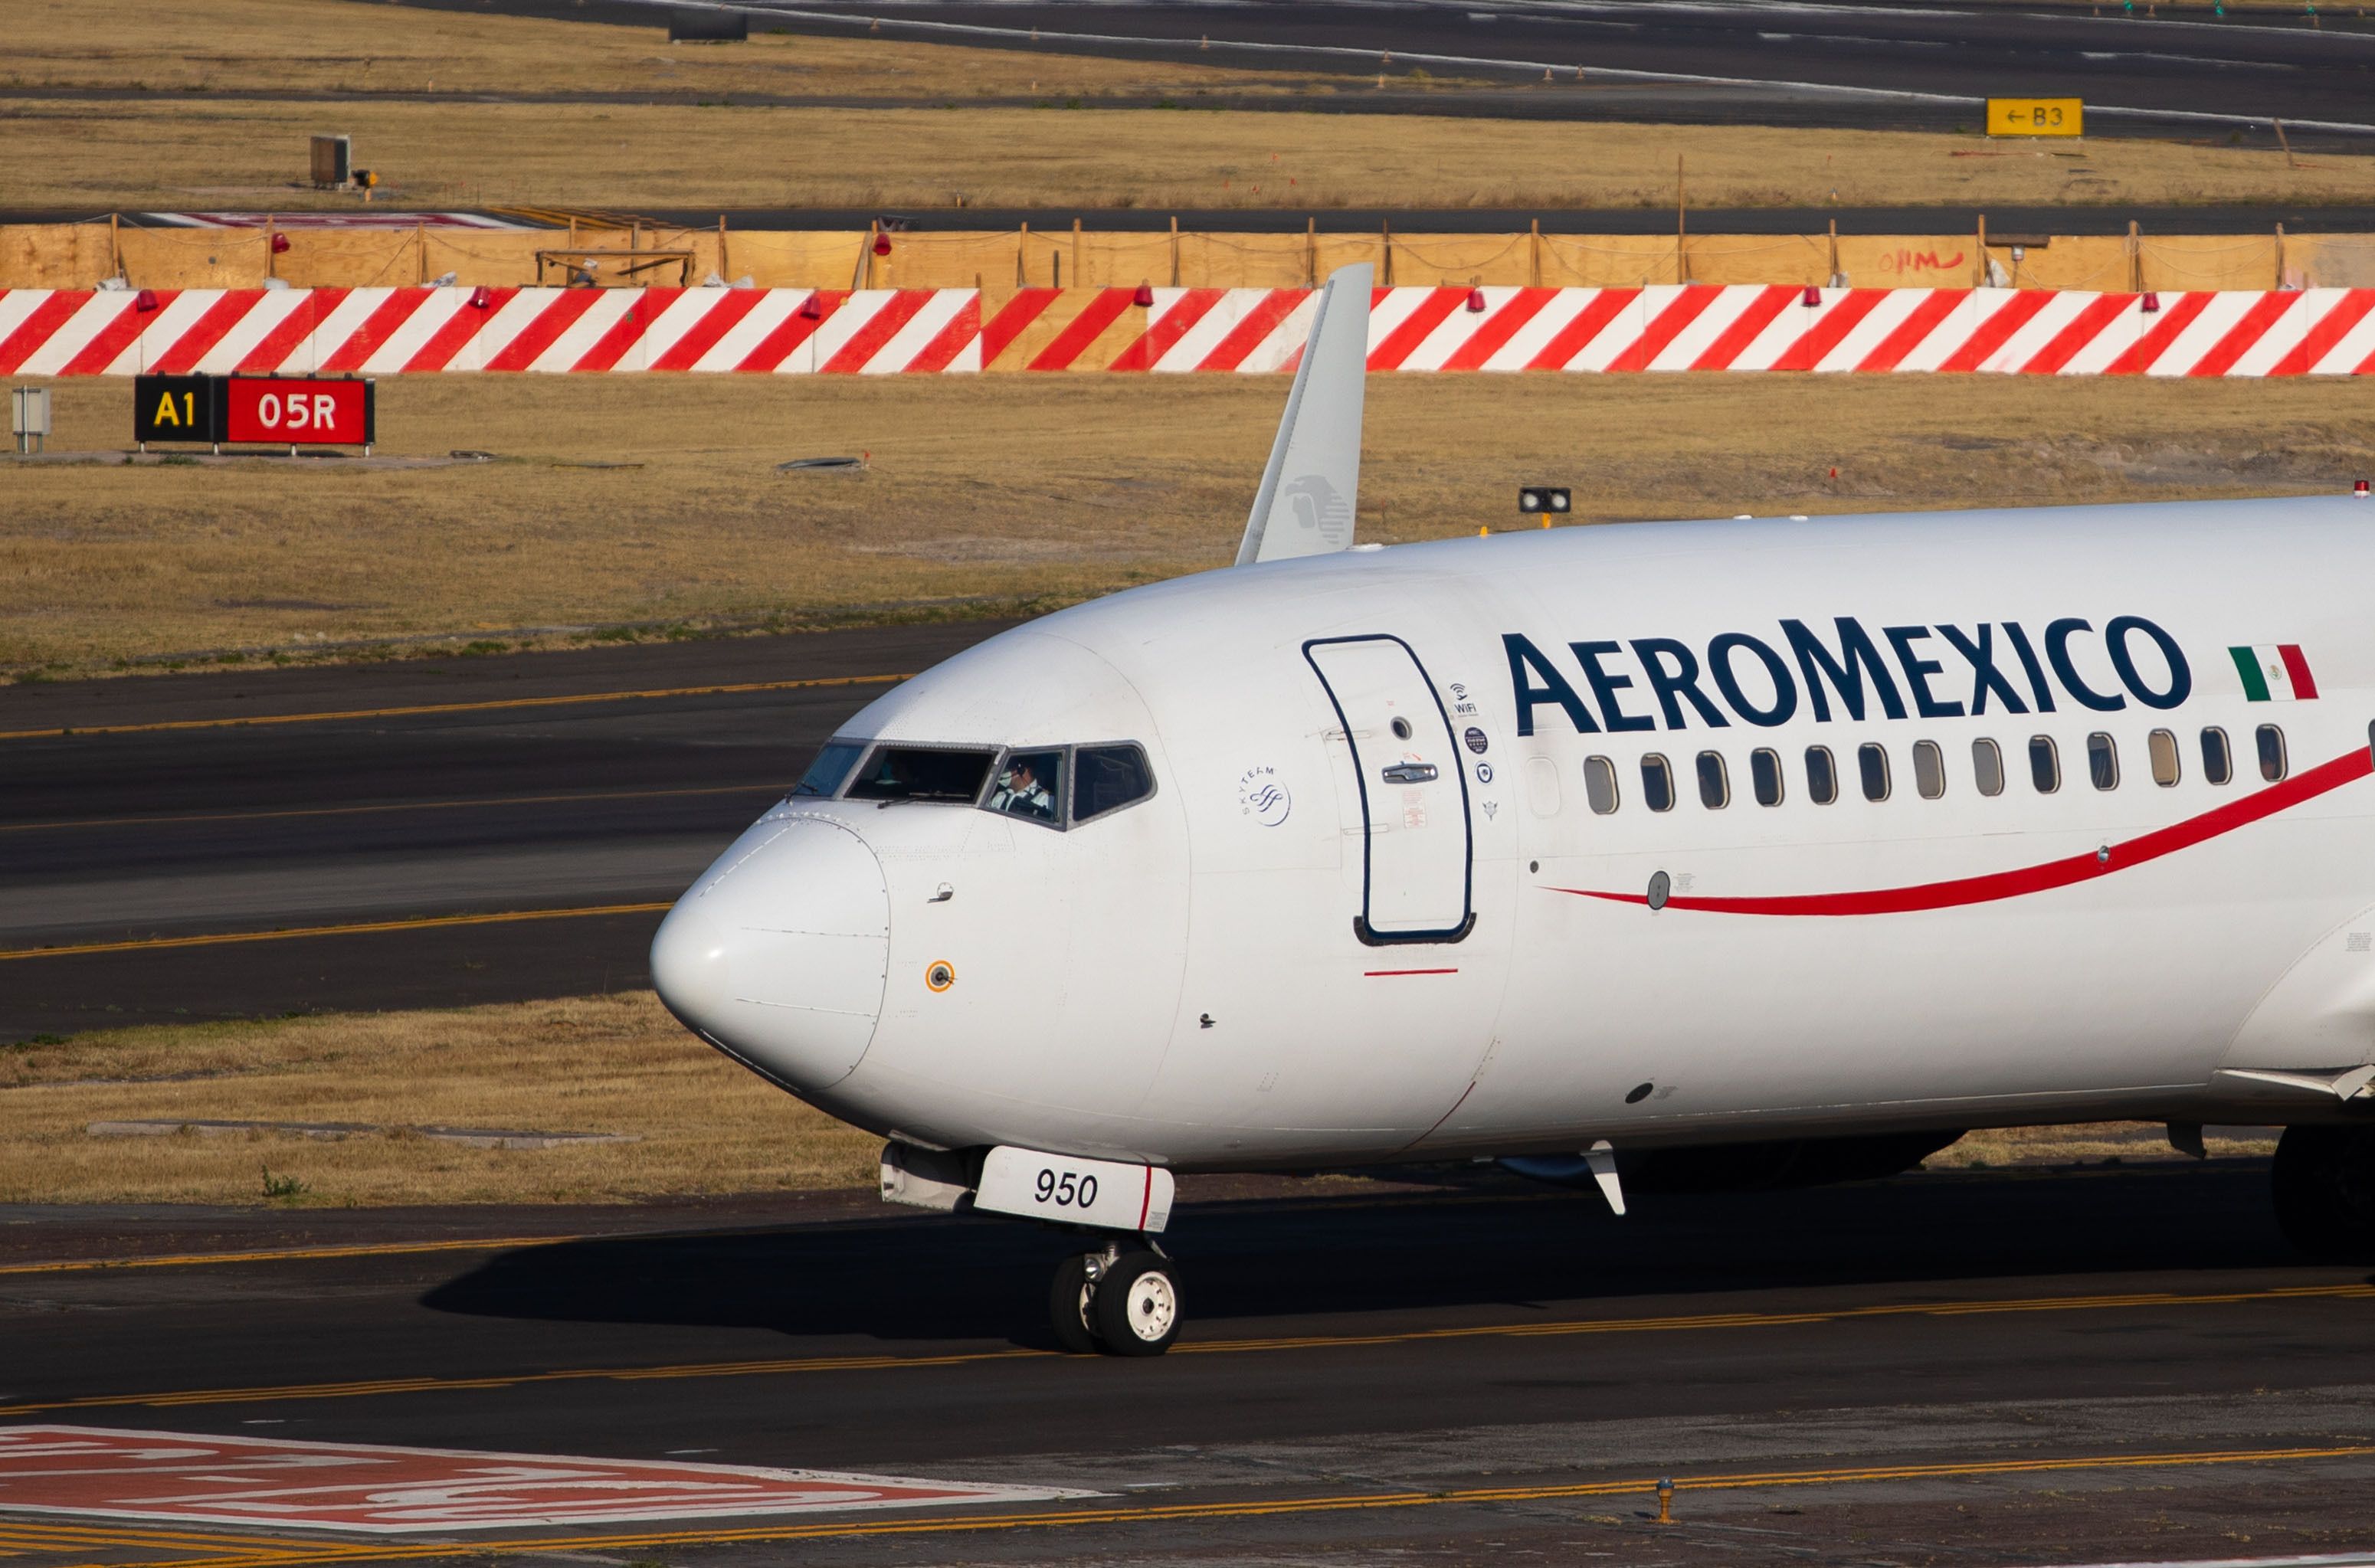 Nose of Aeromexico aircraft on airport apron